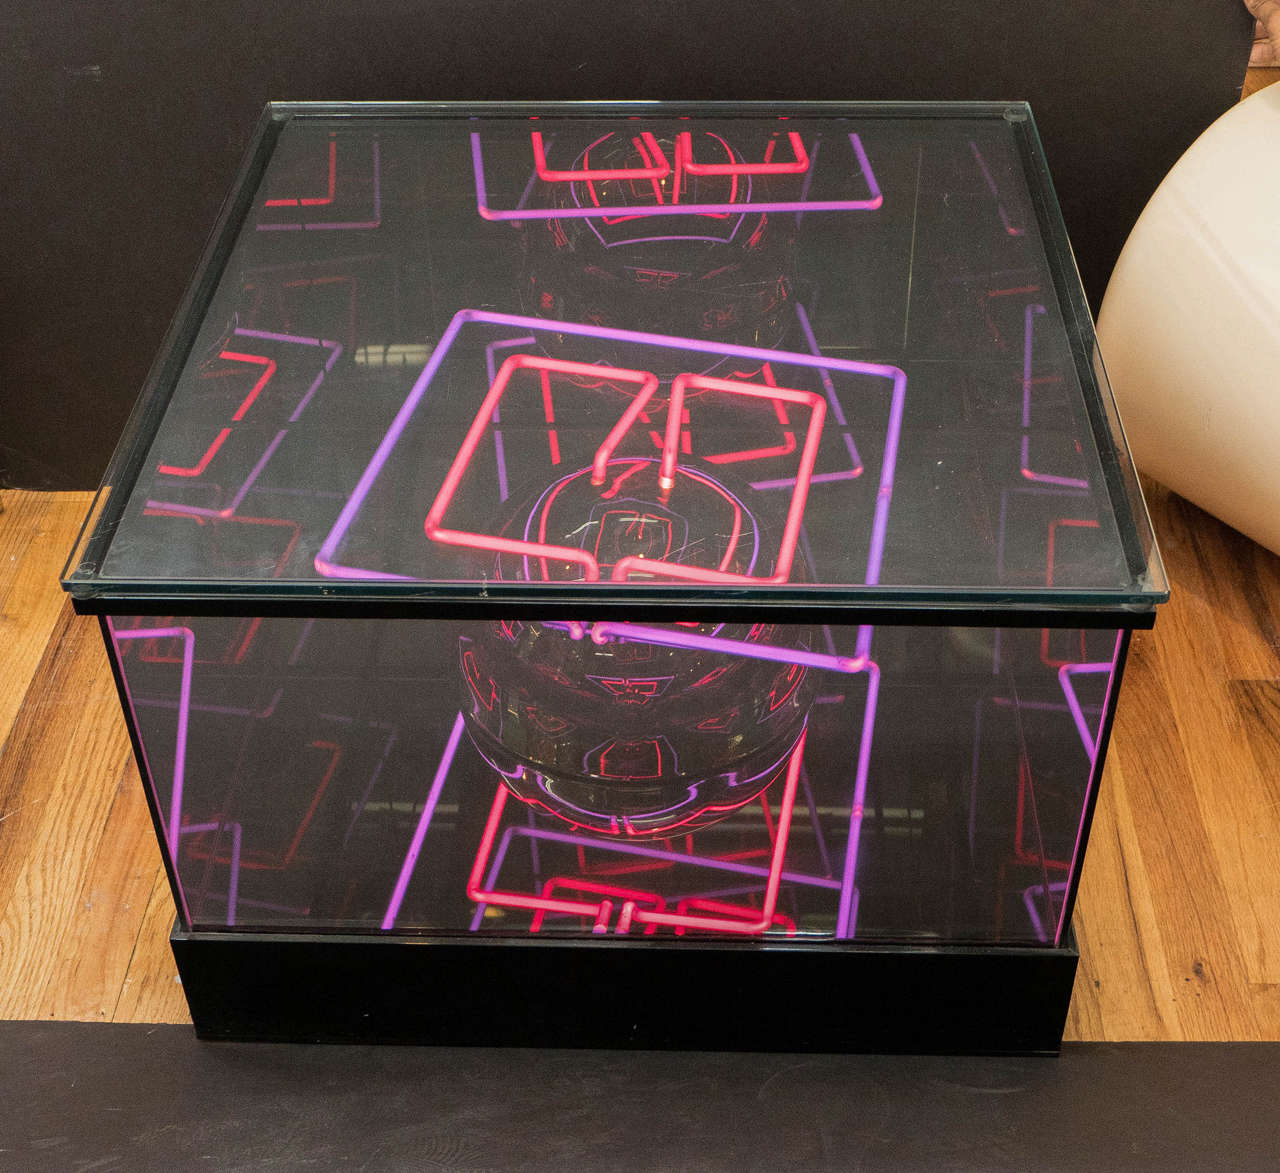 A vintage light box and decorative end table, produced circa 1970s, in glass and Lucite, with pink and violet neon lights affixed to a sphere nucleus; against the reflective interior, the lights appear as multiple-dimensional patterns. Good vintage